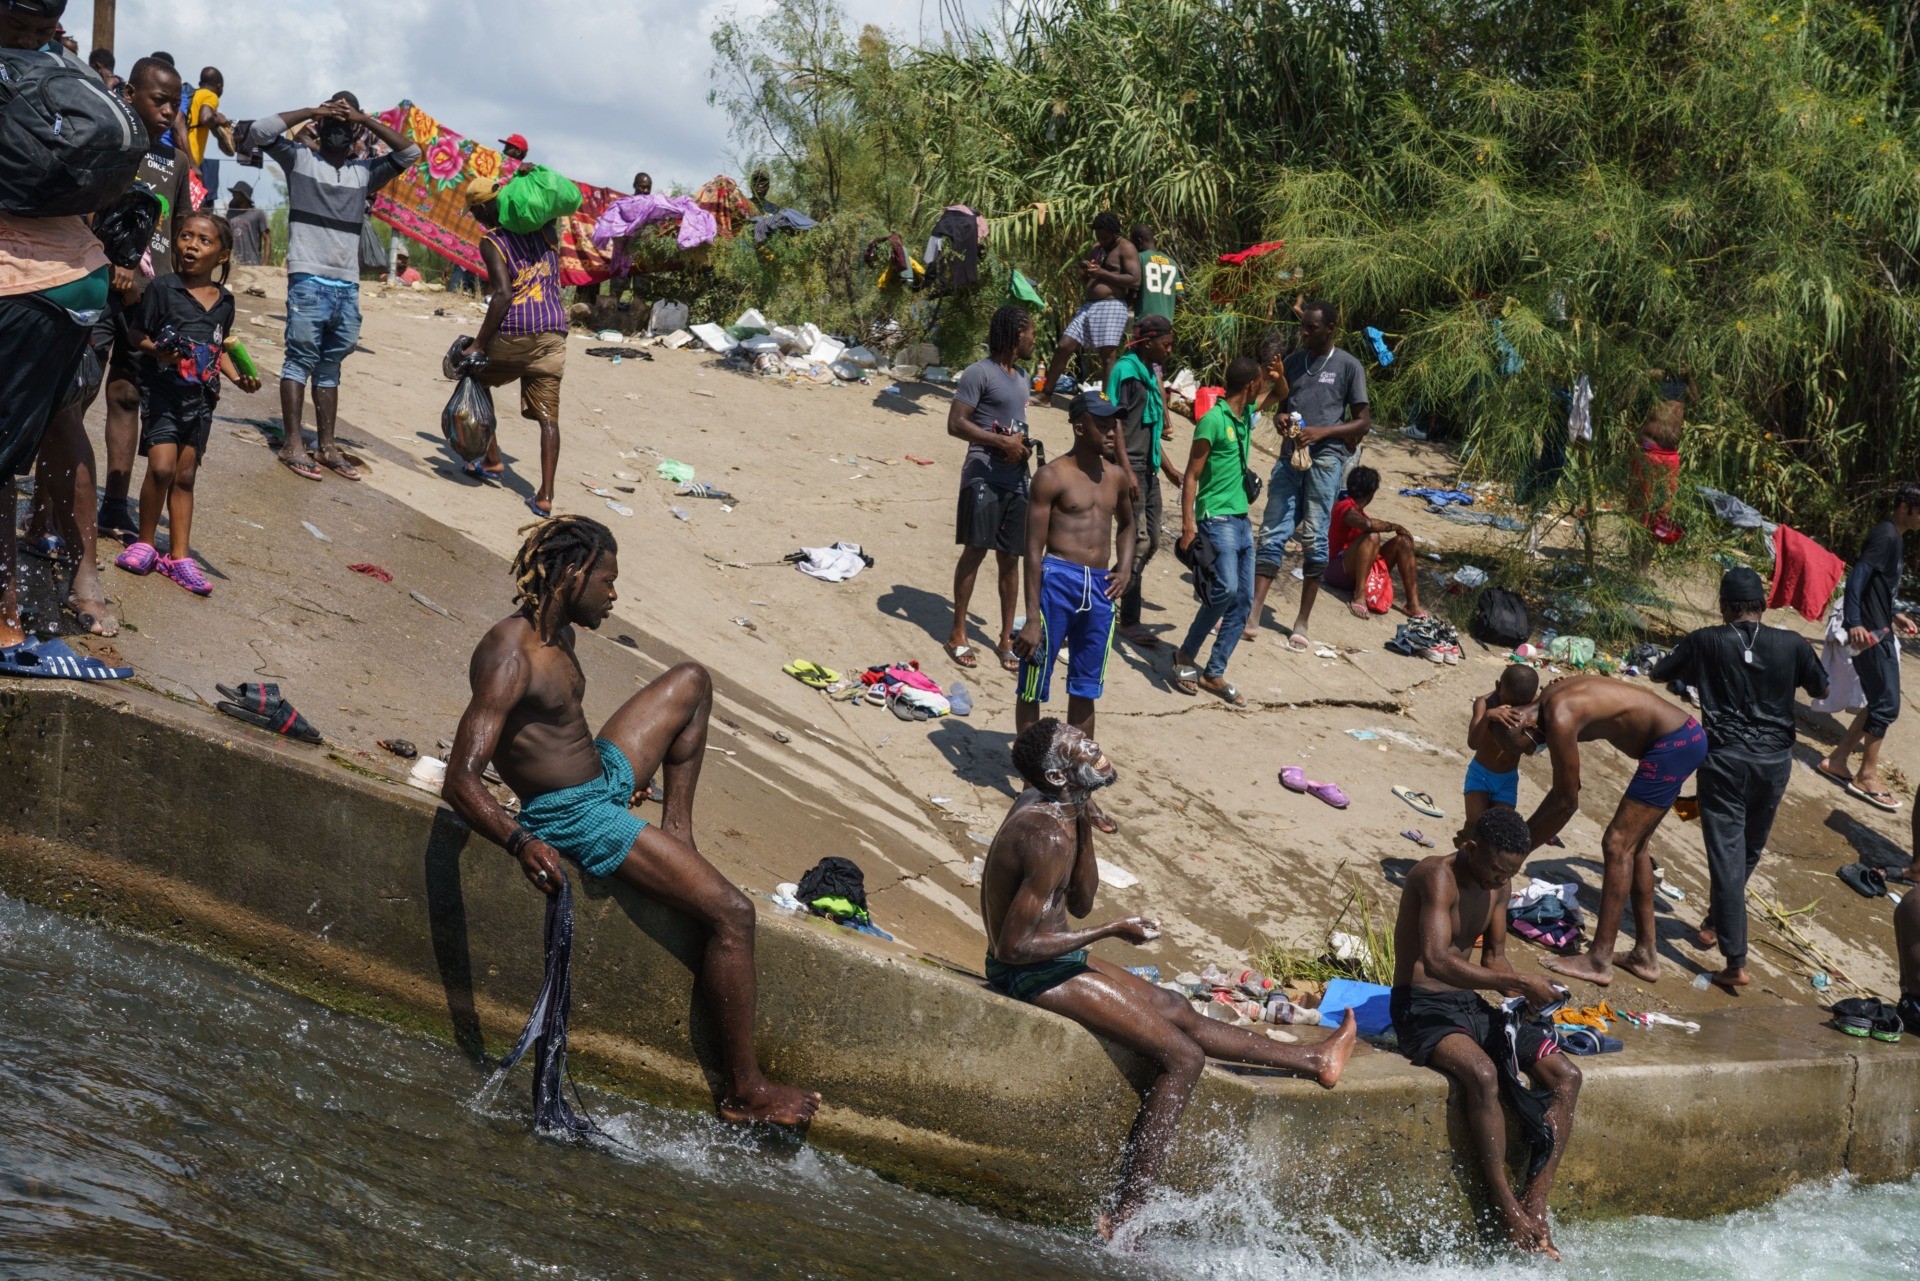 Migrant men bathe in the Rio Grande near the Del Rio-Acuna Port of Entry in Del Rio, Texas, on September 18, 2021. - The United States said on September 18 that it would ramp up deportation flights for thousands of migrants who flooded into the Texas border city of Del Rio, as authorities scramble to alleviate a burgeoning crisis for President Joe Biden's administration. The migrants who poured into the city, many of them Haitian, were being held in an area controlled by US Customs and Border Protection (CBP) beneath the Del Rio International Bridge, which carries traffic across the Rio Grande river into Mexico. (Photo by PAUL RATJE / AFP) (Photo by PAUL RATJE/AFP via Getty Images)